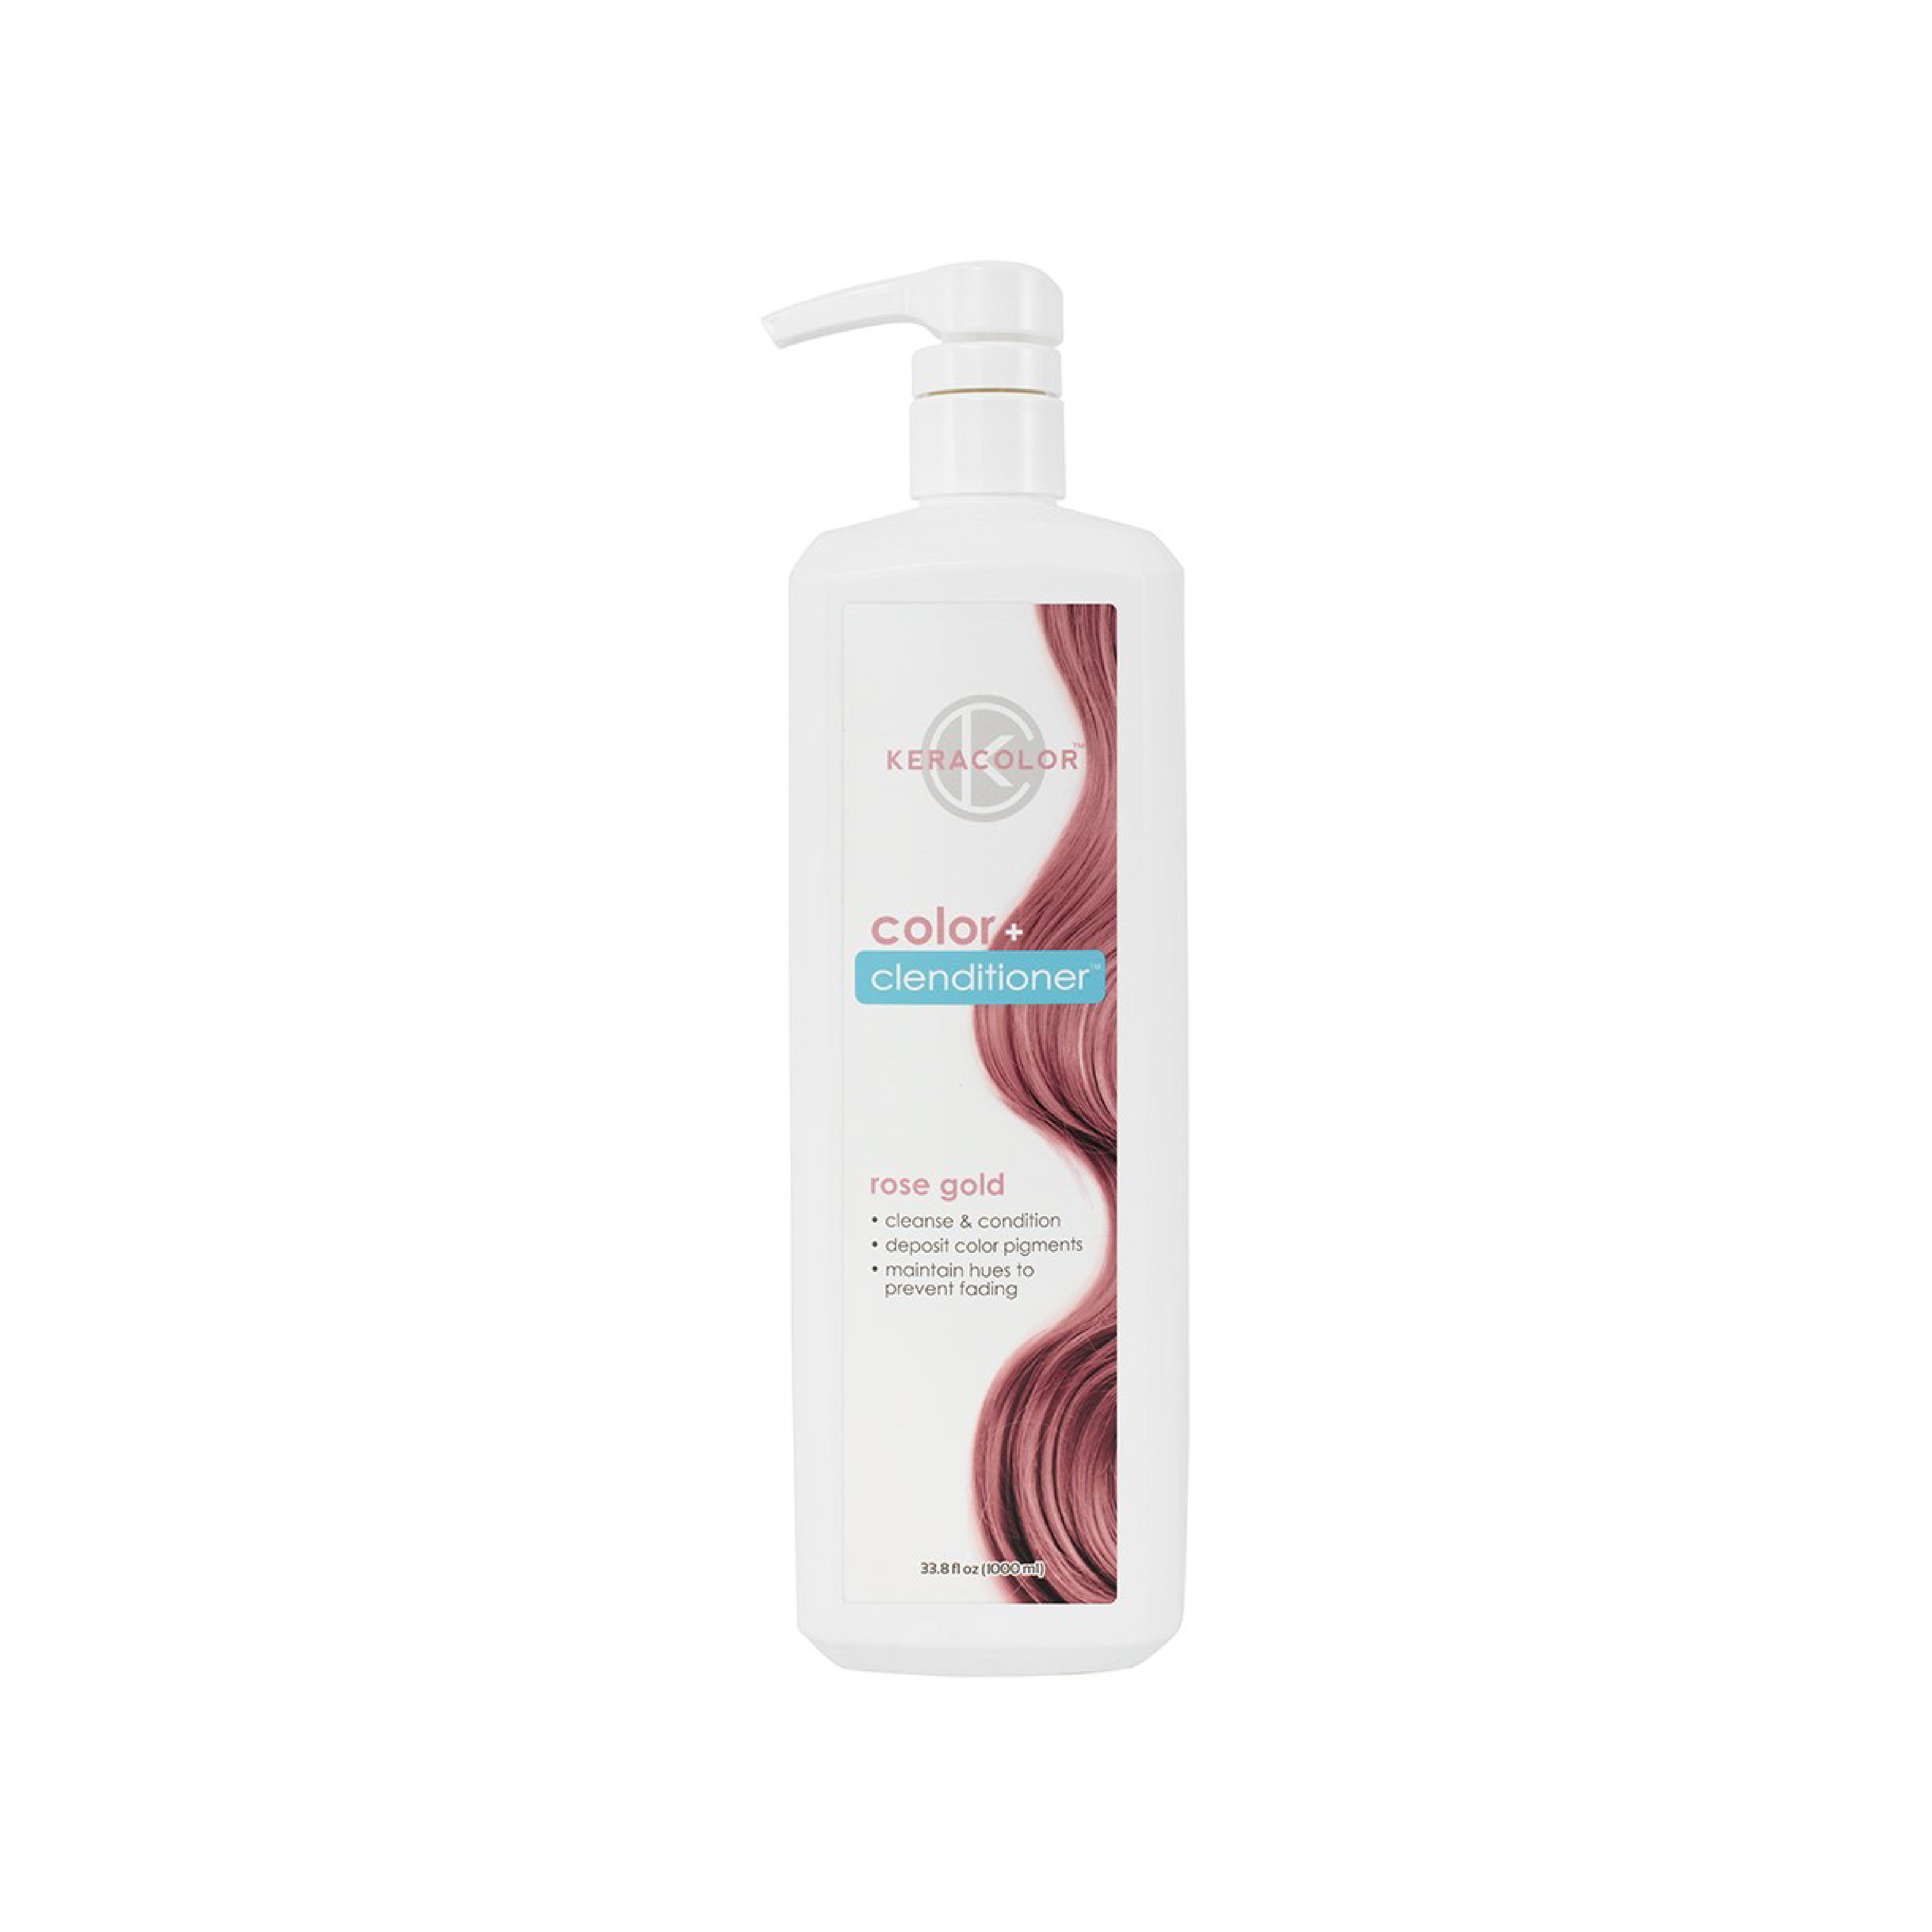 Keracolor Color Clenditioner Rose Gold Colouring Shampoo - 1000ml